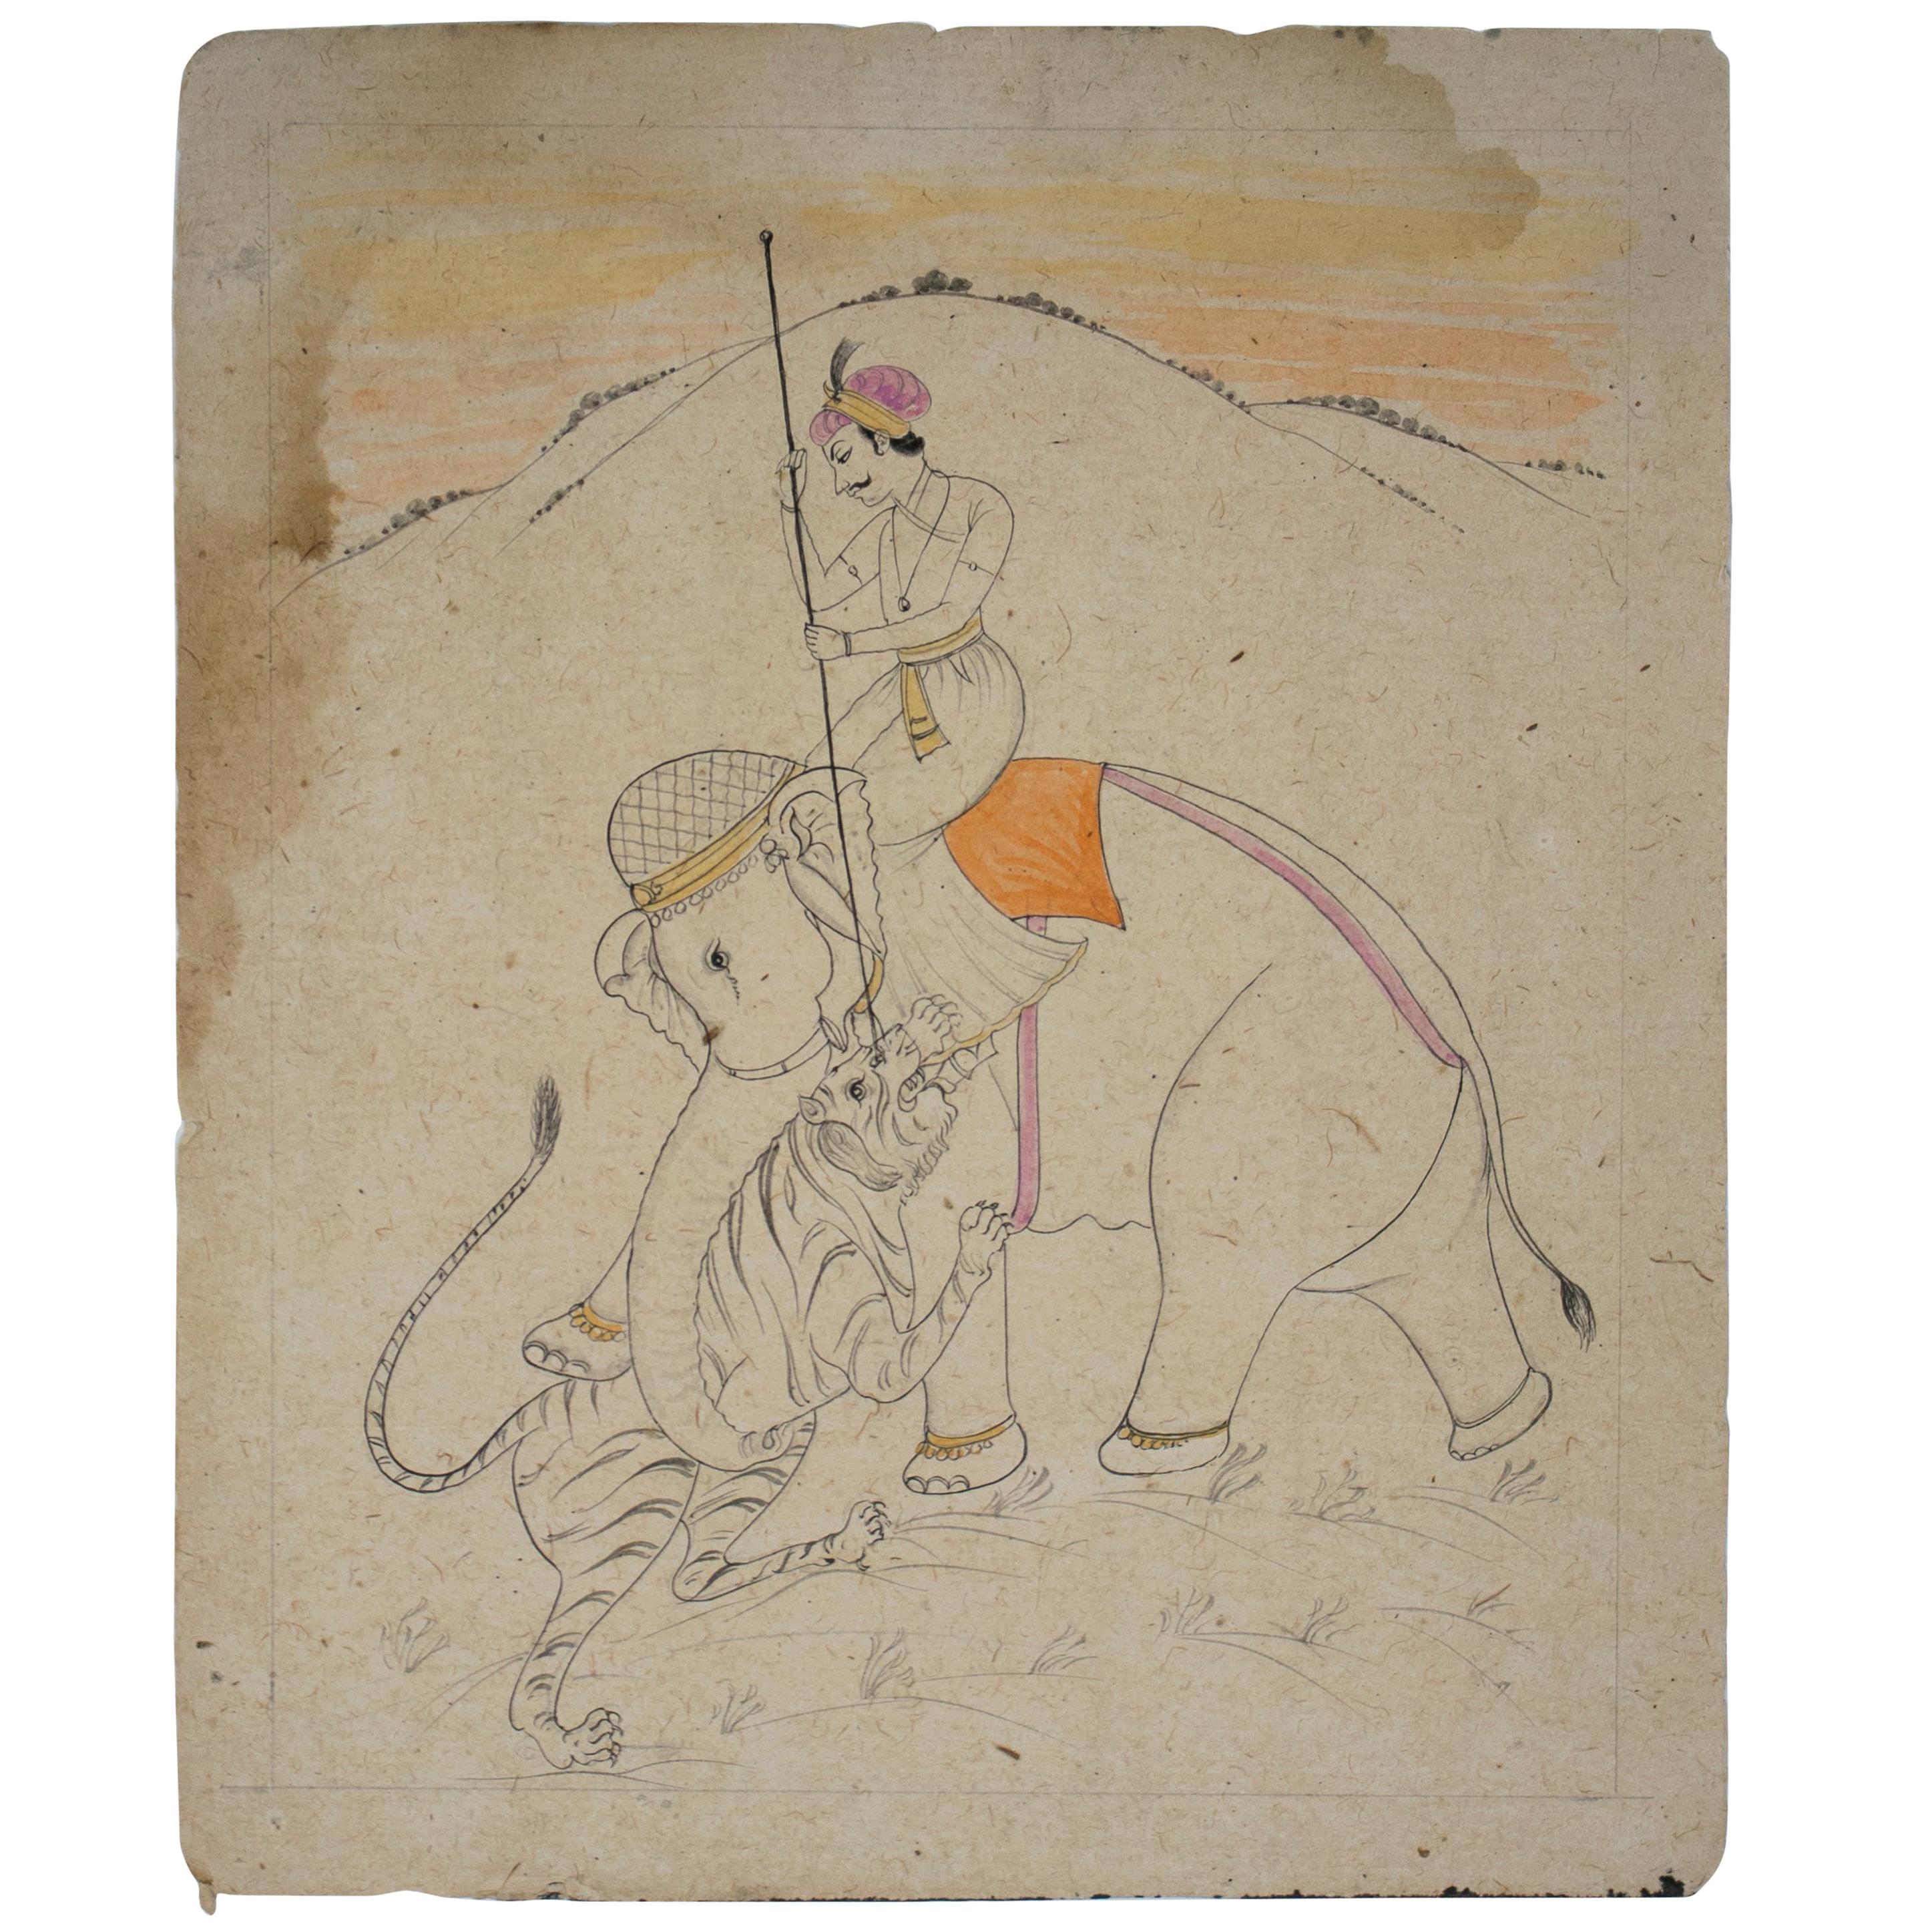 1970s Indian Paper Drawing of a Man Riding an Elephant